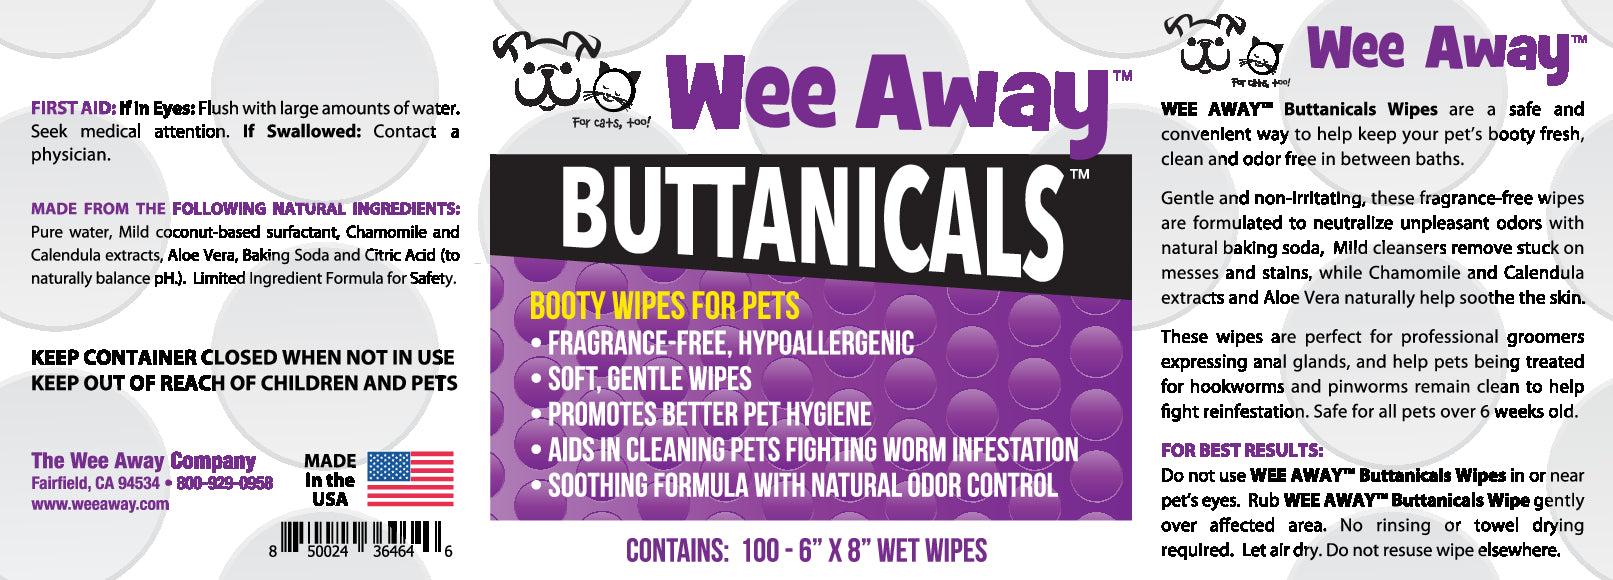 Wee Away Buttanicals Wipes For Dogs